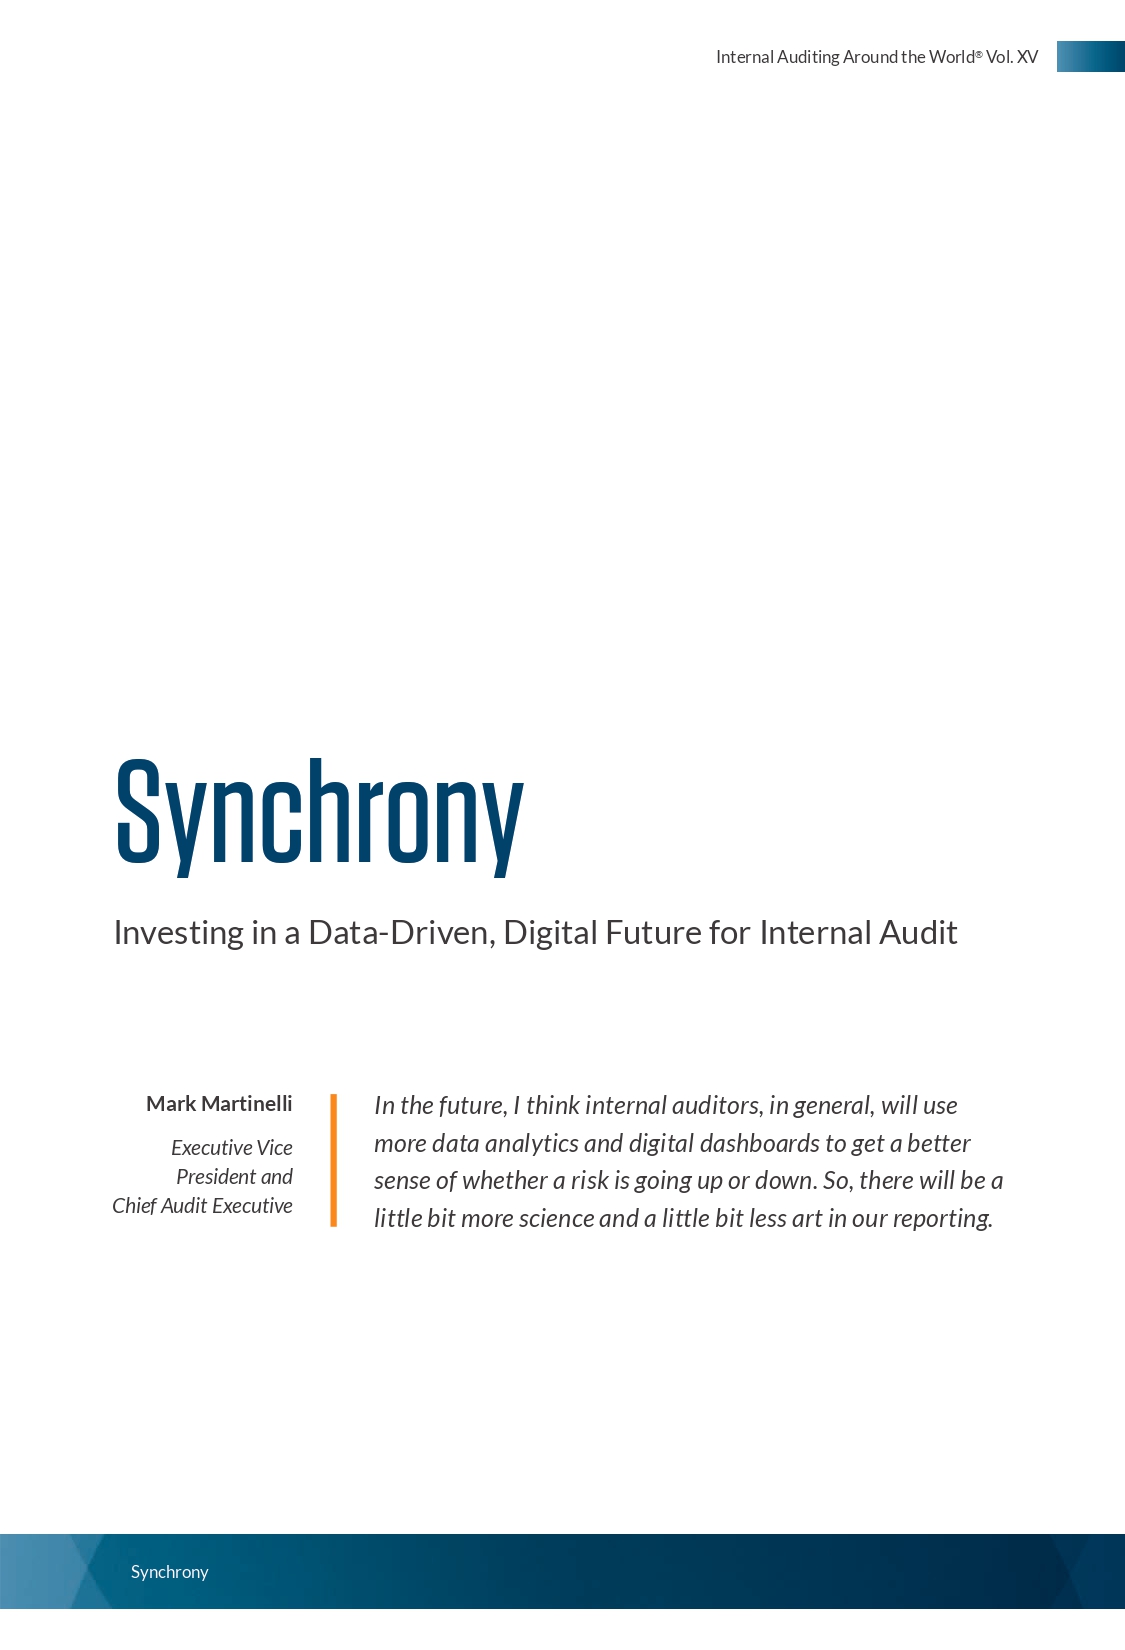 Synchrony: Investing in a Data-Driven, Digital Future for Internal Audit